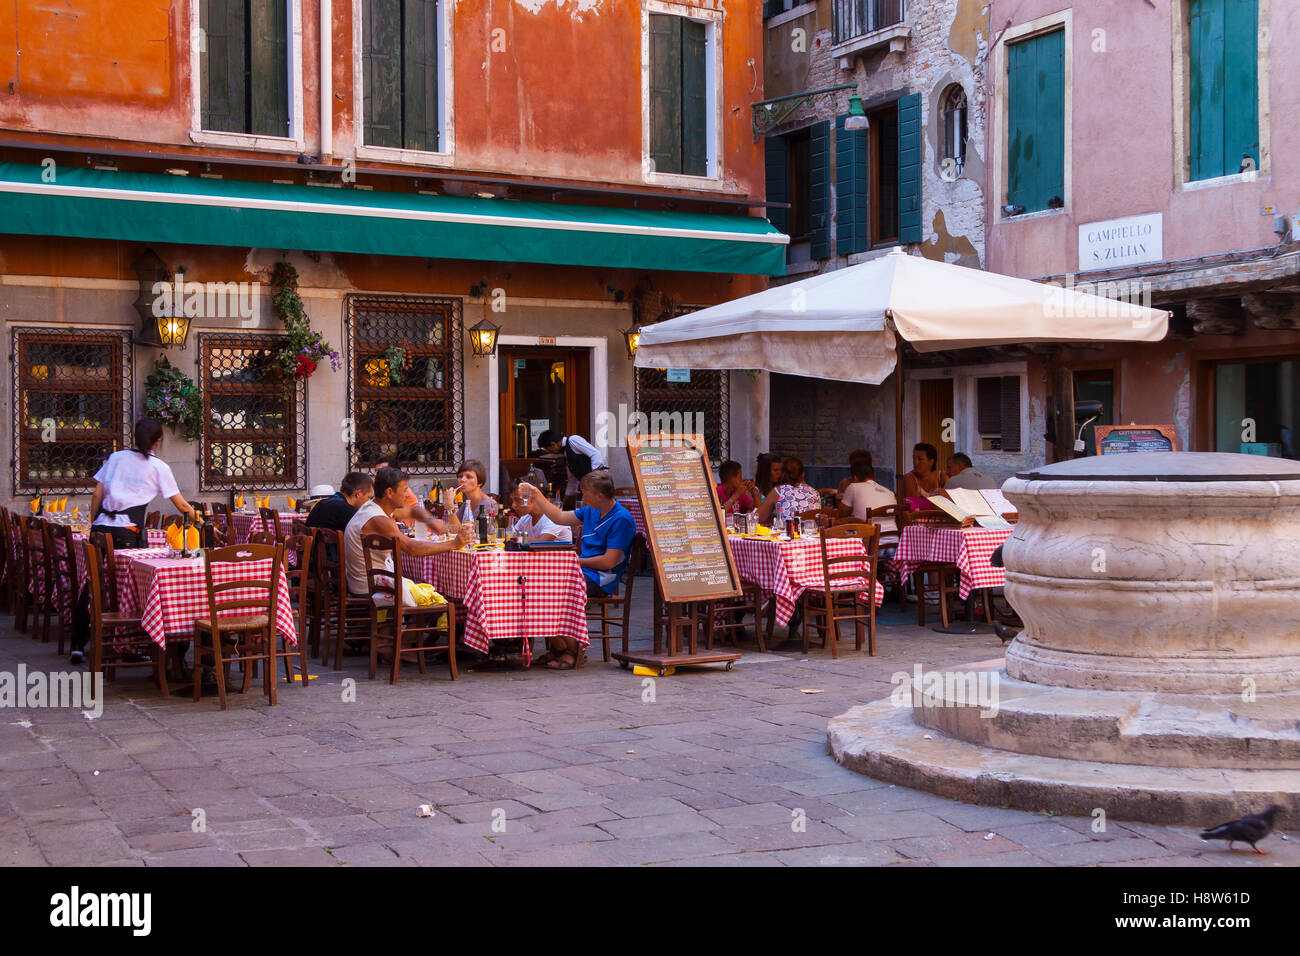 A Cafe' in an old square in Venice showing customer sitting at tables outside Stock Photo